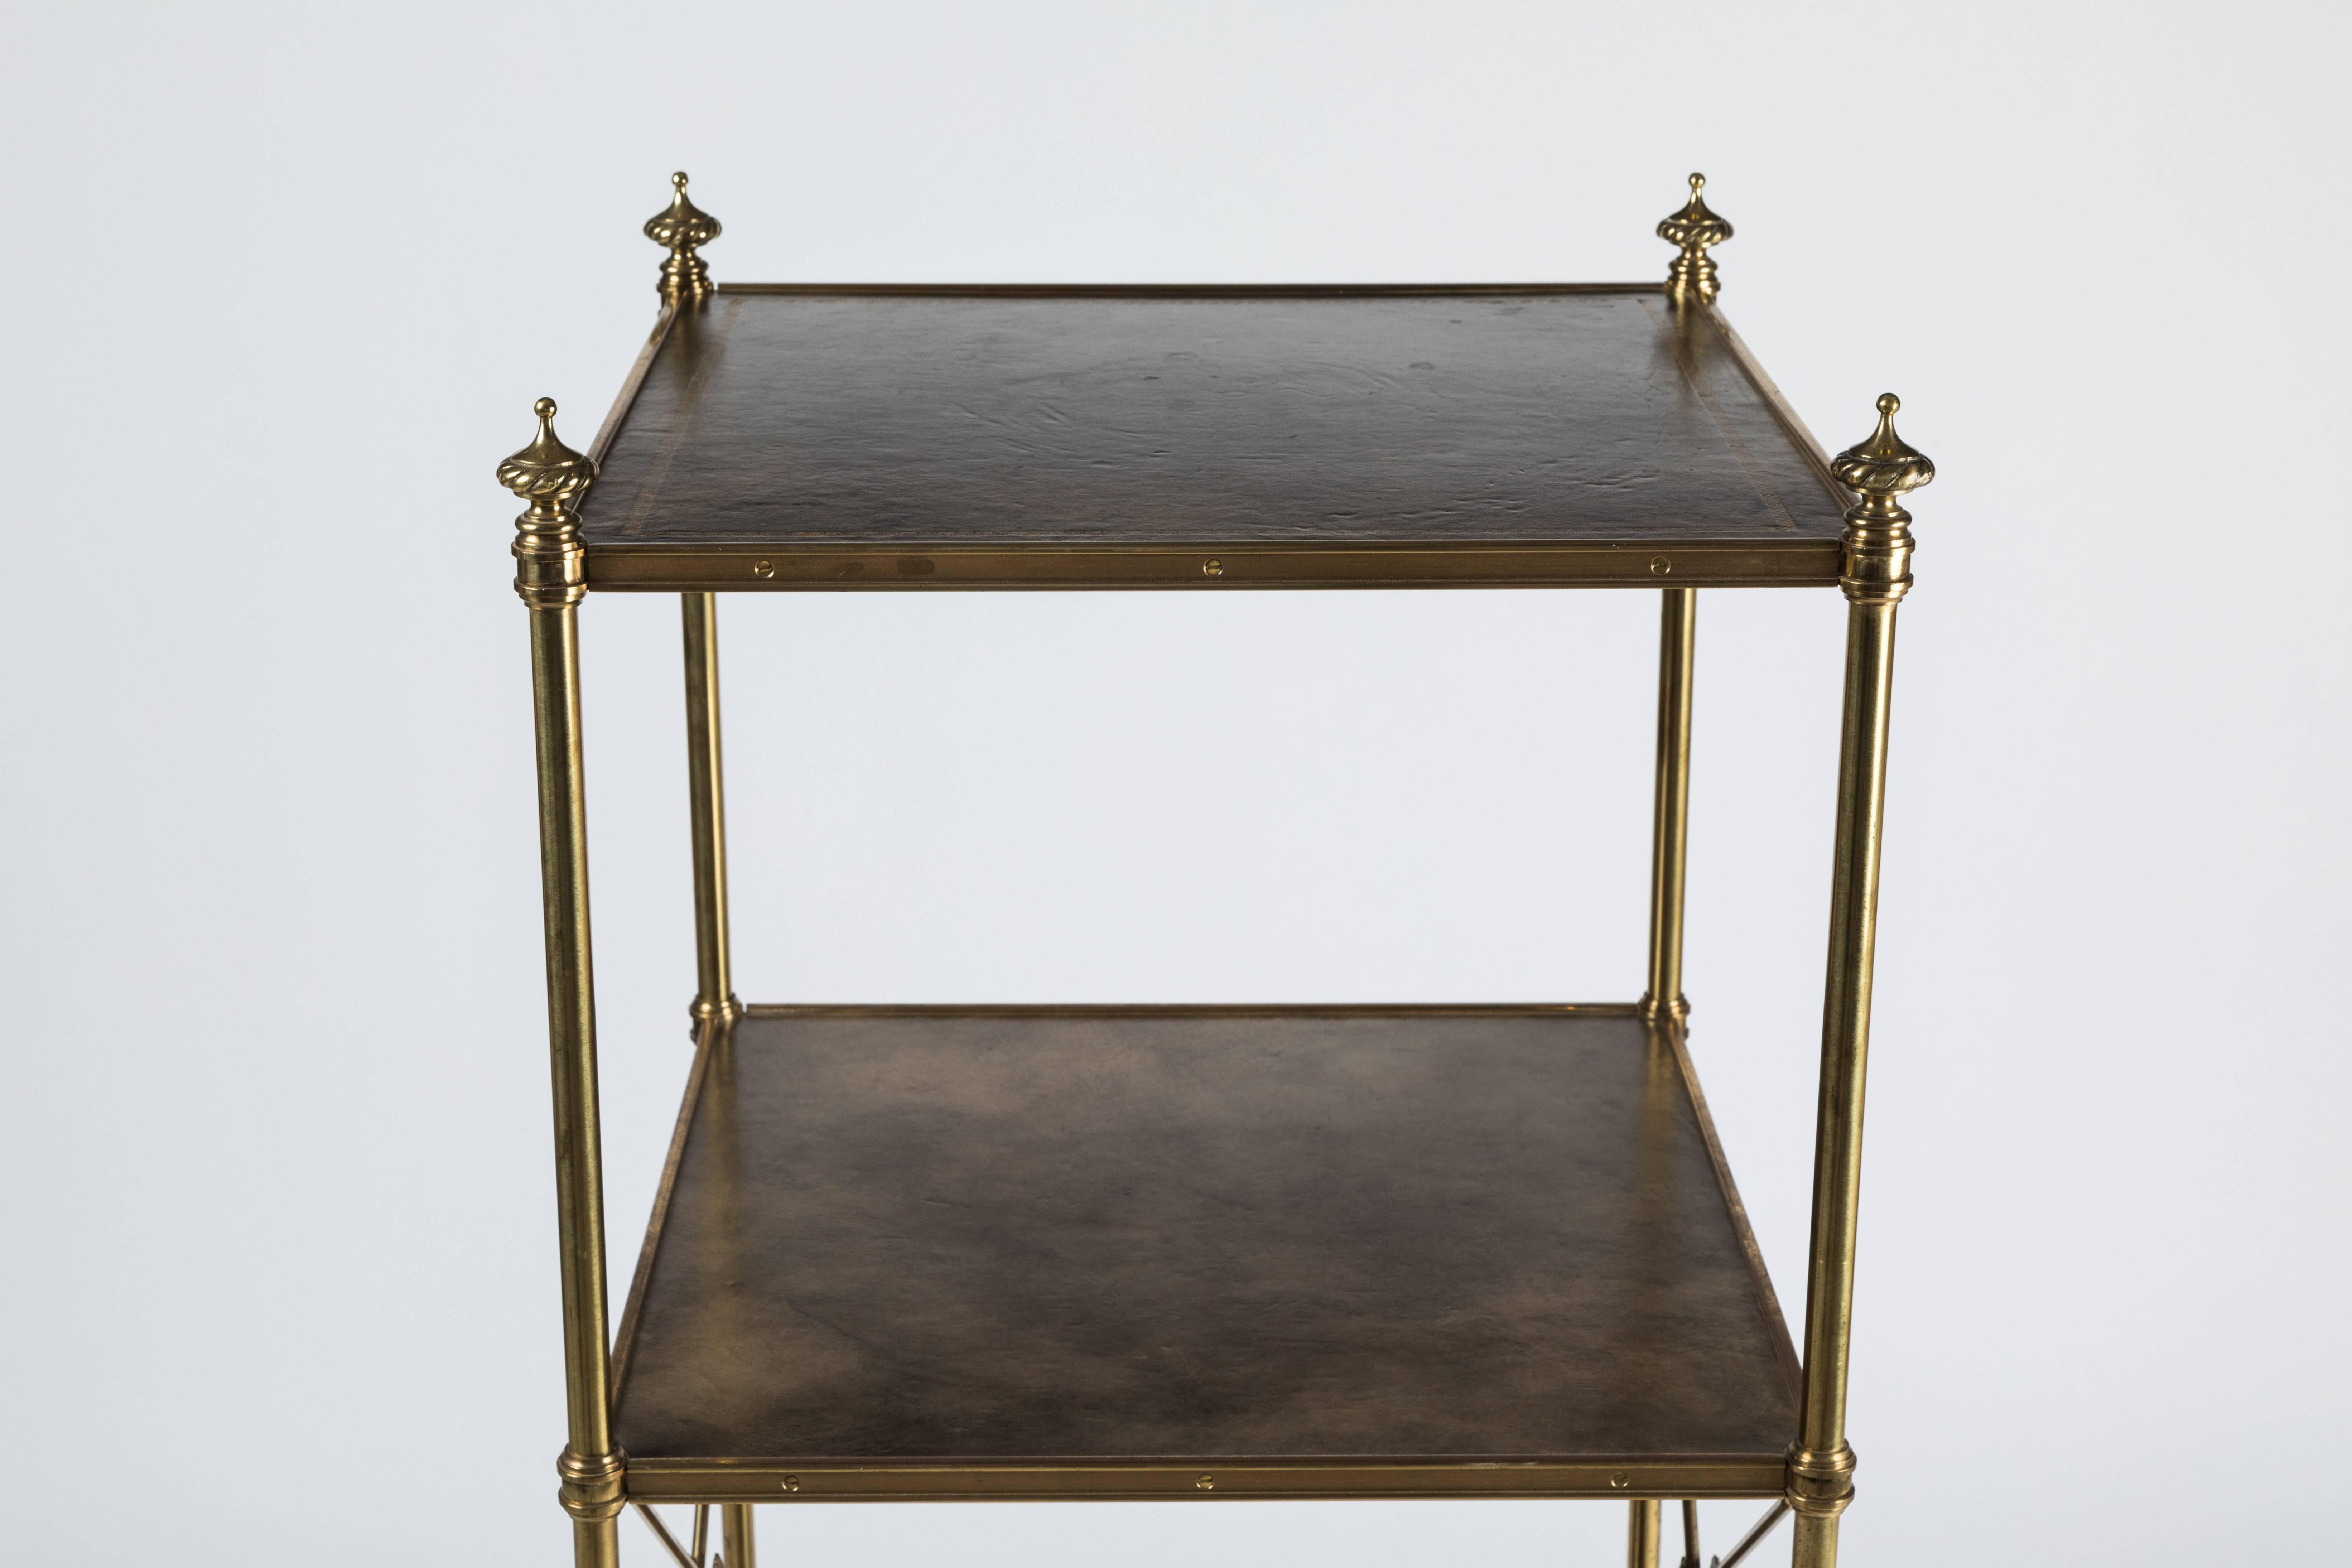 Polished Empire Style Brass and Leather Etagere by Baker